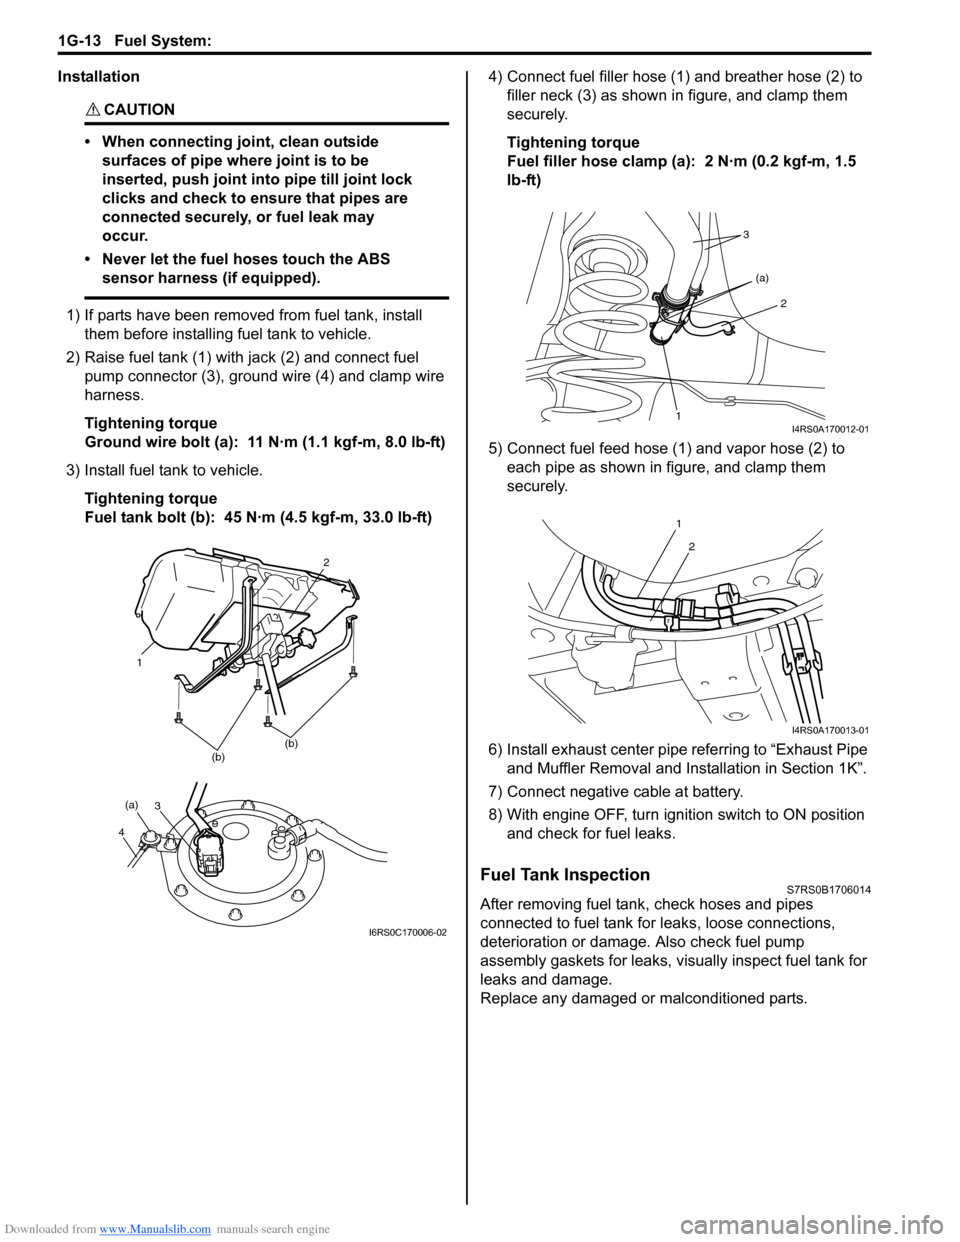 SUZUKI SWIFT 2005 2.G Service Workshop Manual Downloaded from www.Manualslib.com manuals search engine 1G-13 Fuel System: 
Installation
CAUTION! 
• When connecting joint, clean outside surfaces of pipe where joint is to be 
inserted, push joint